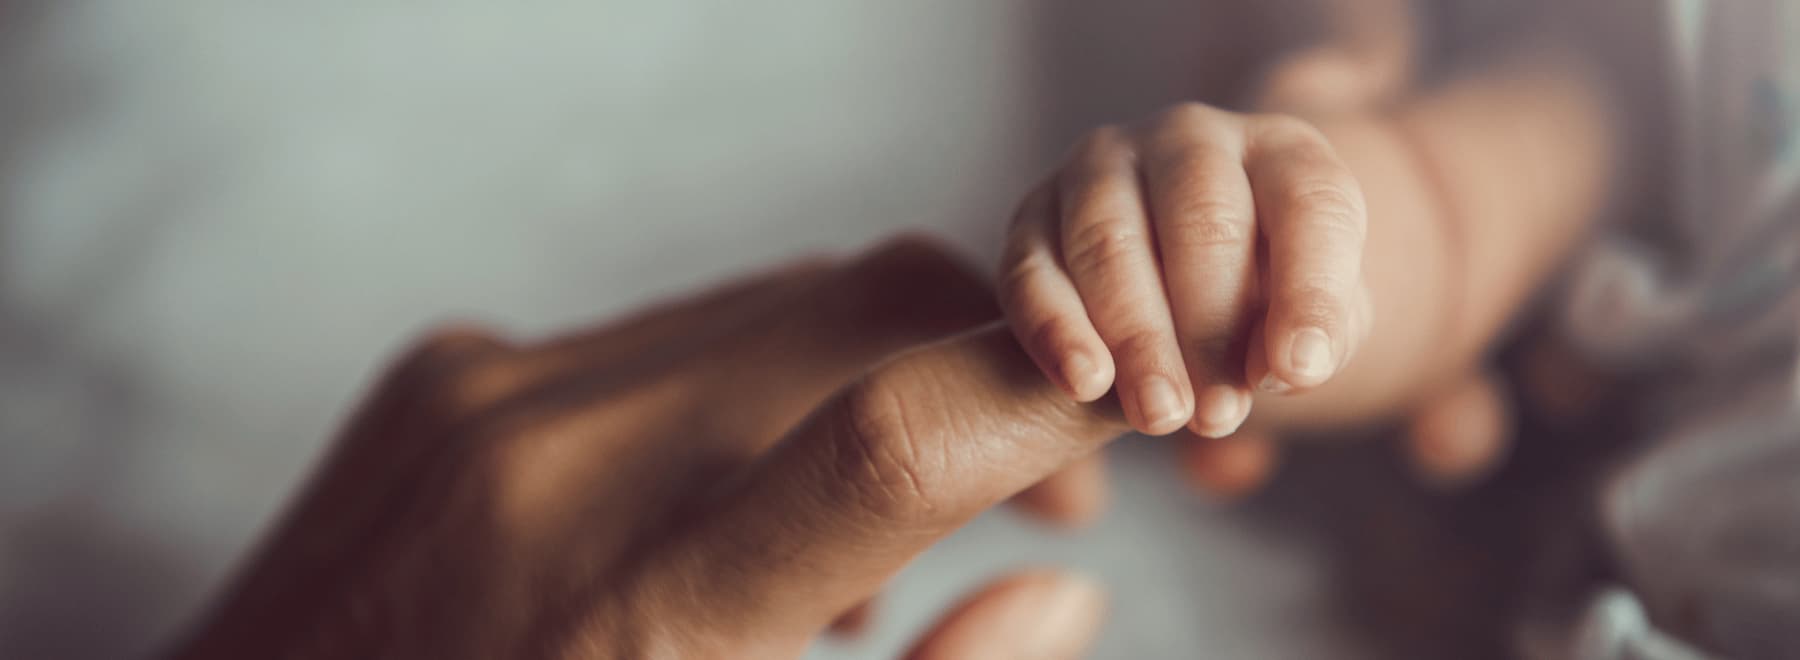 Baby holding the finger of adult hand.